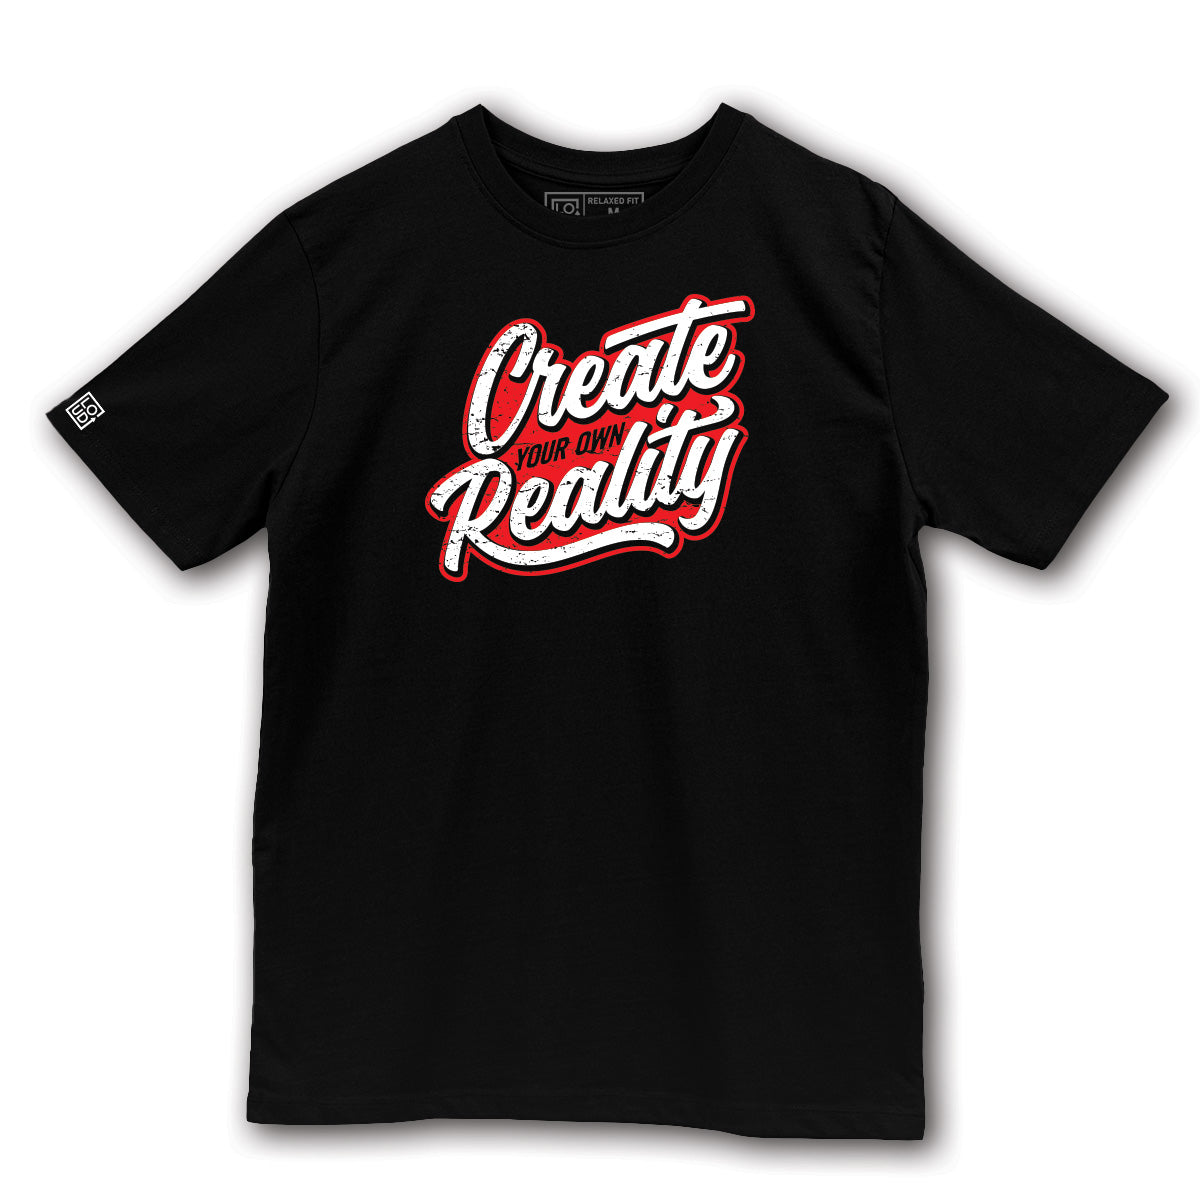 Unisex T-shirt "Create Your Own Reality"